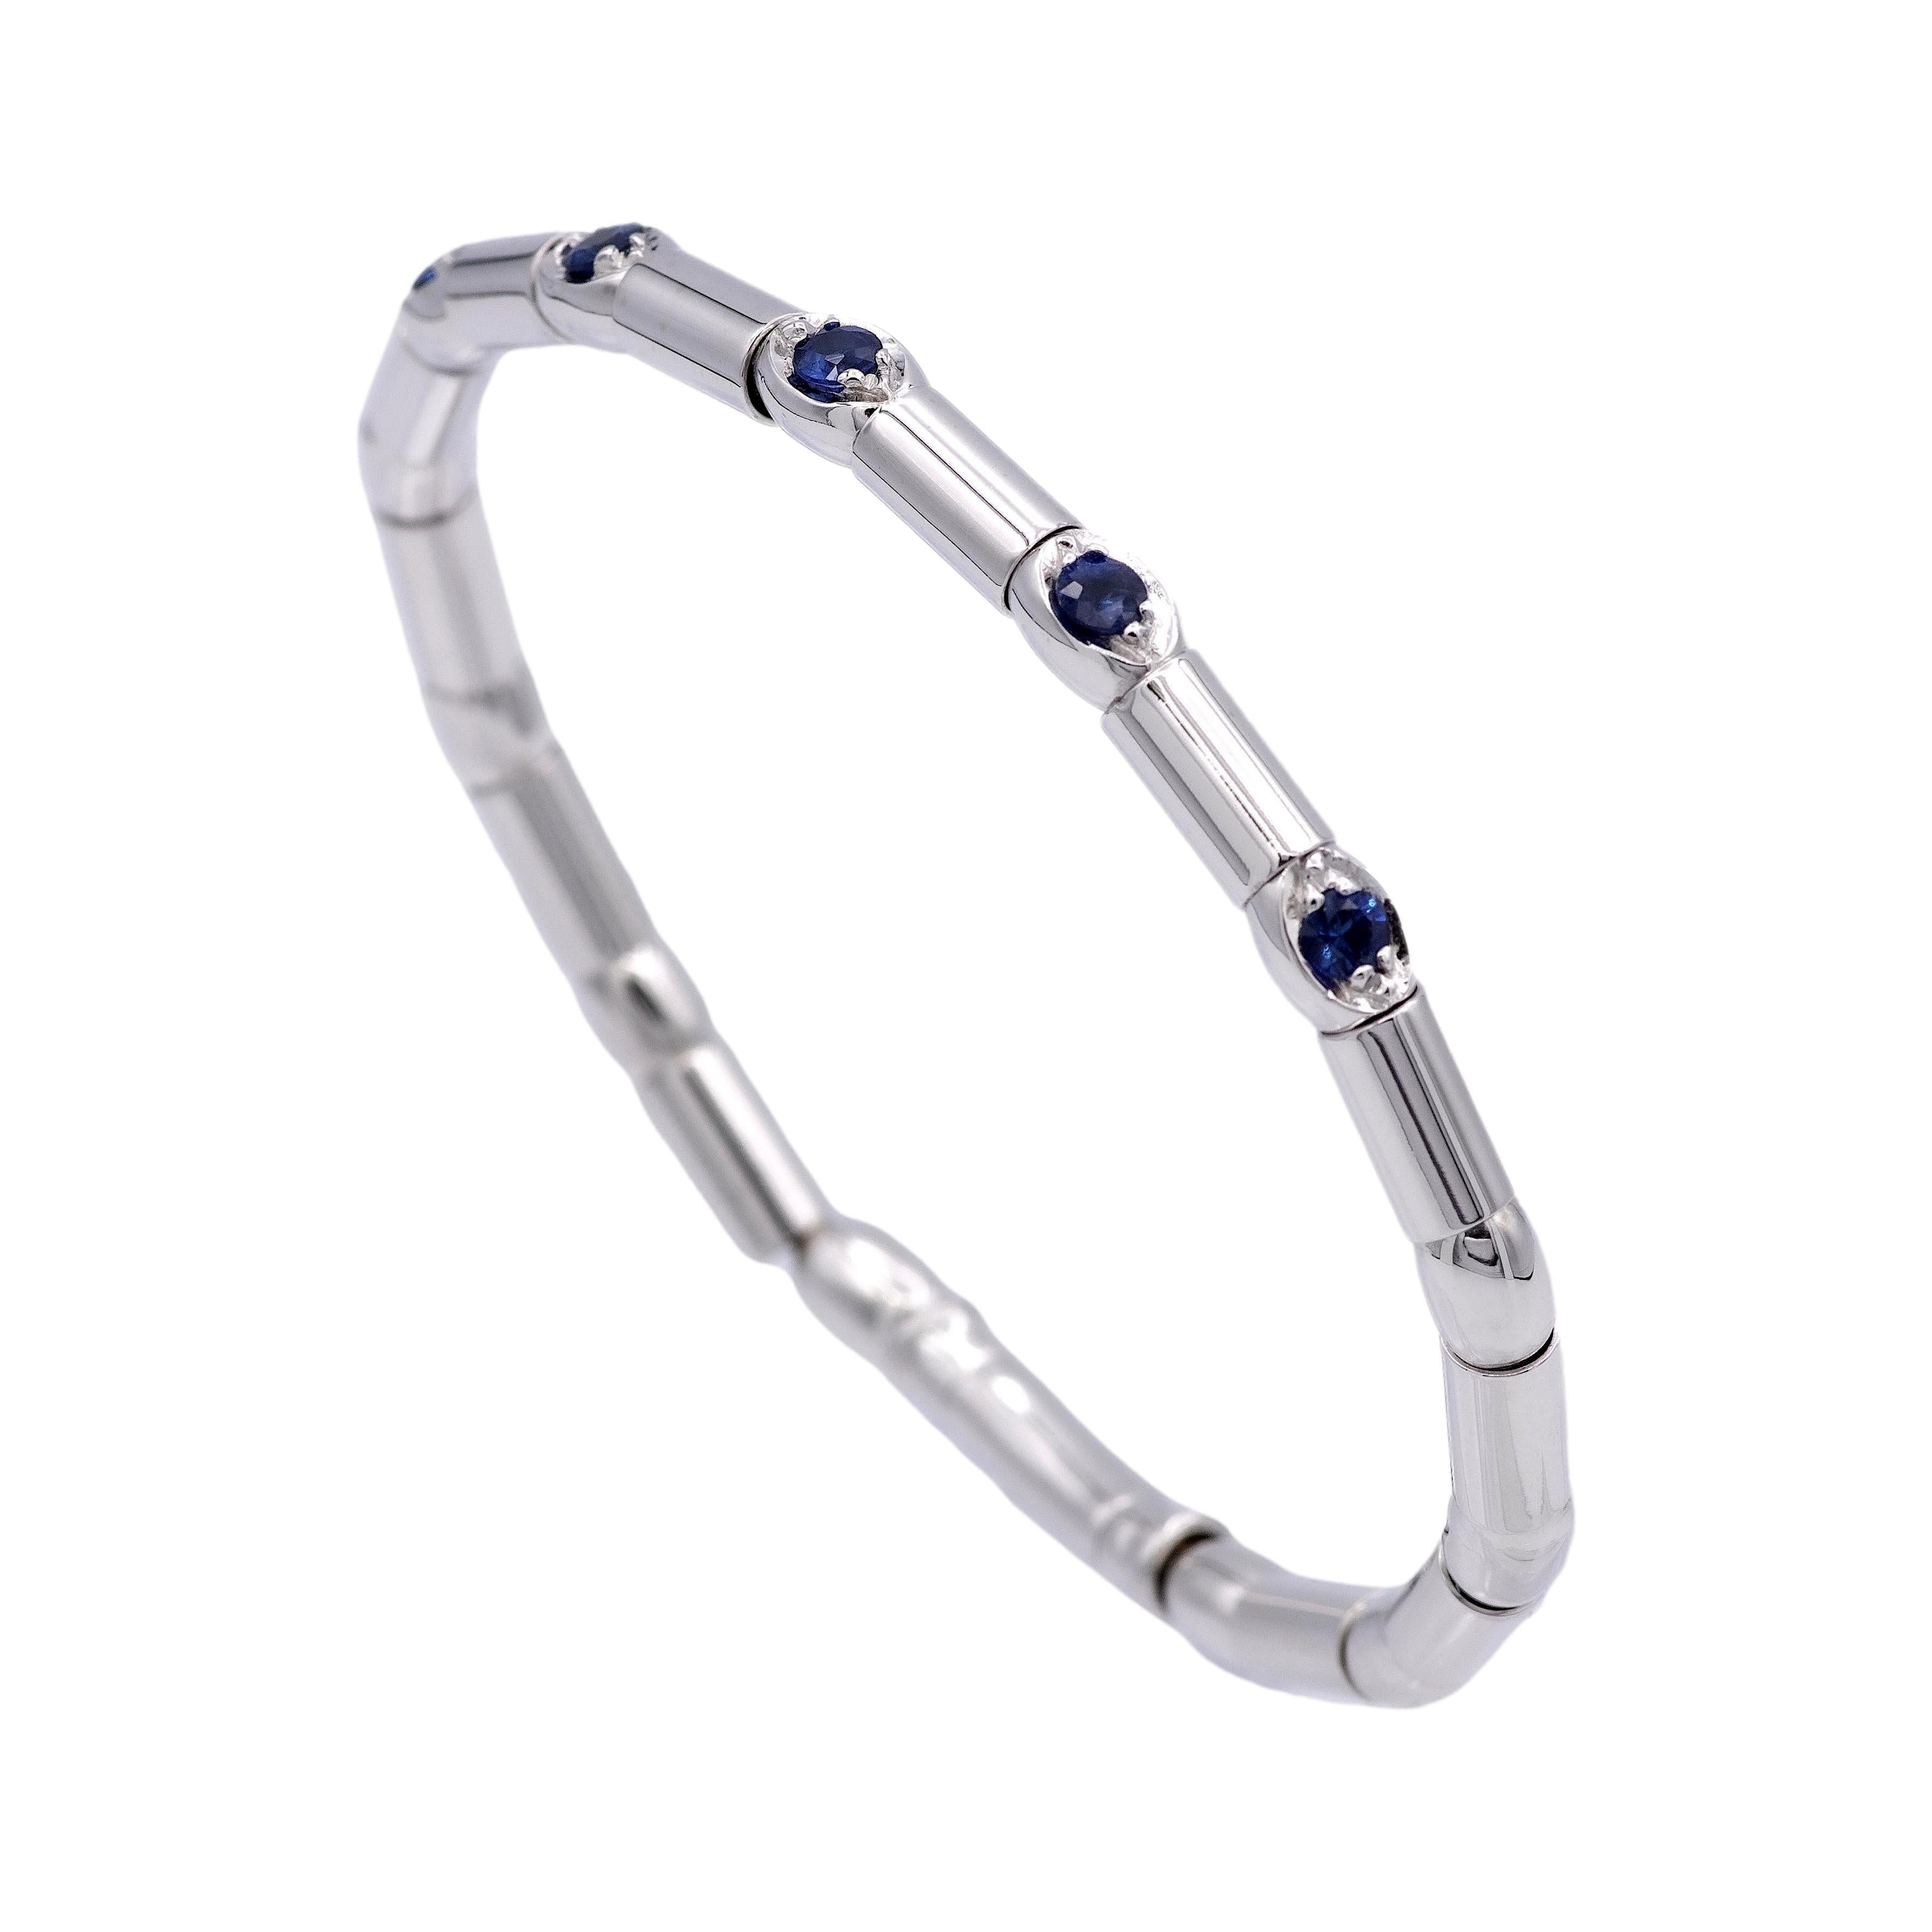 Bracelet finely crafted in 18 karat white gold featuring 5 round brilliant cut blue sapphire sections across the top weighing a total of approximately 0.50 carats set in prongs in a bamboo style with a push down hinge closure mechanism. Metal has